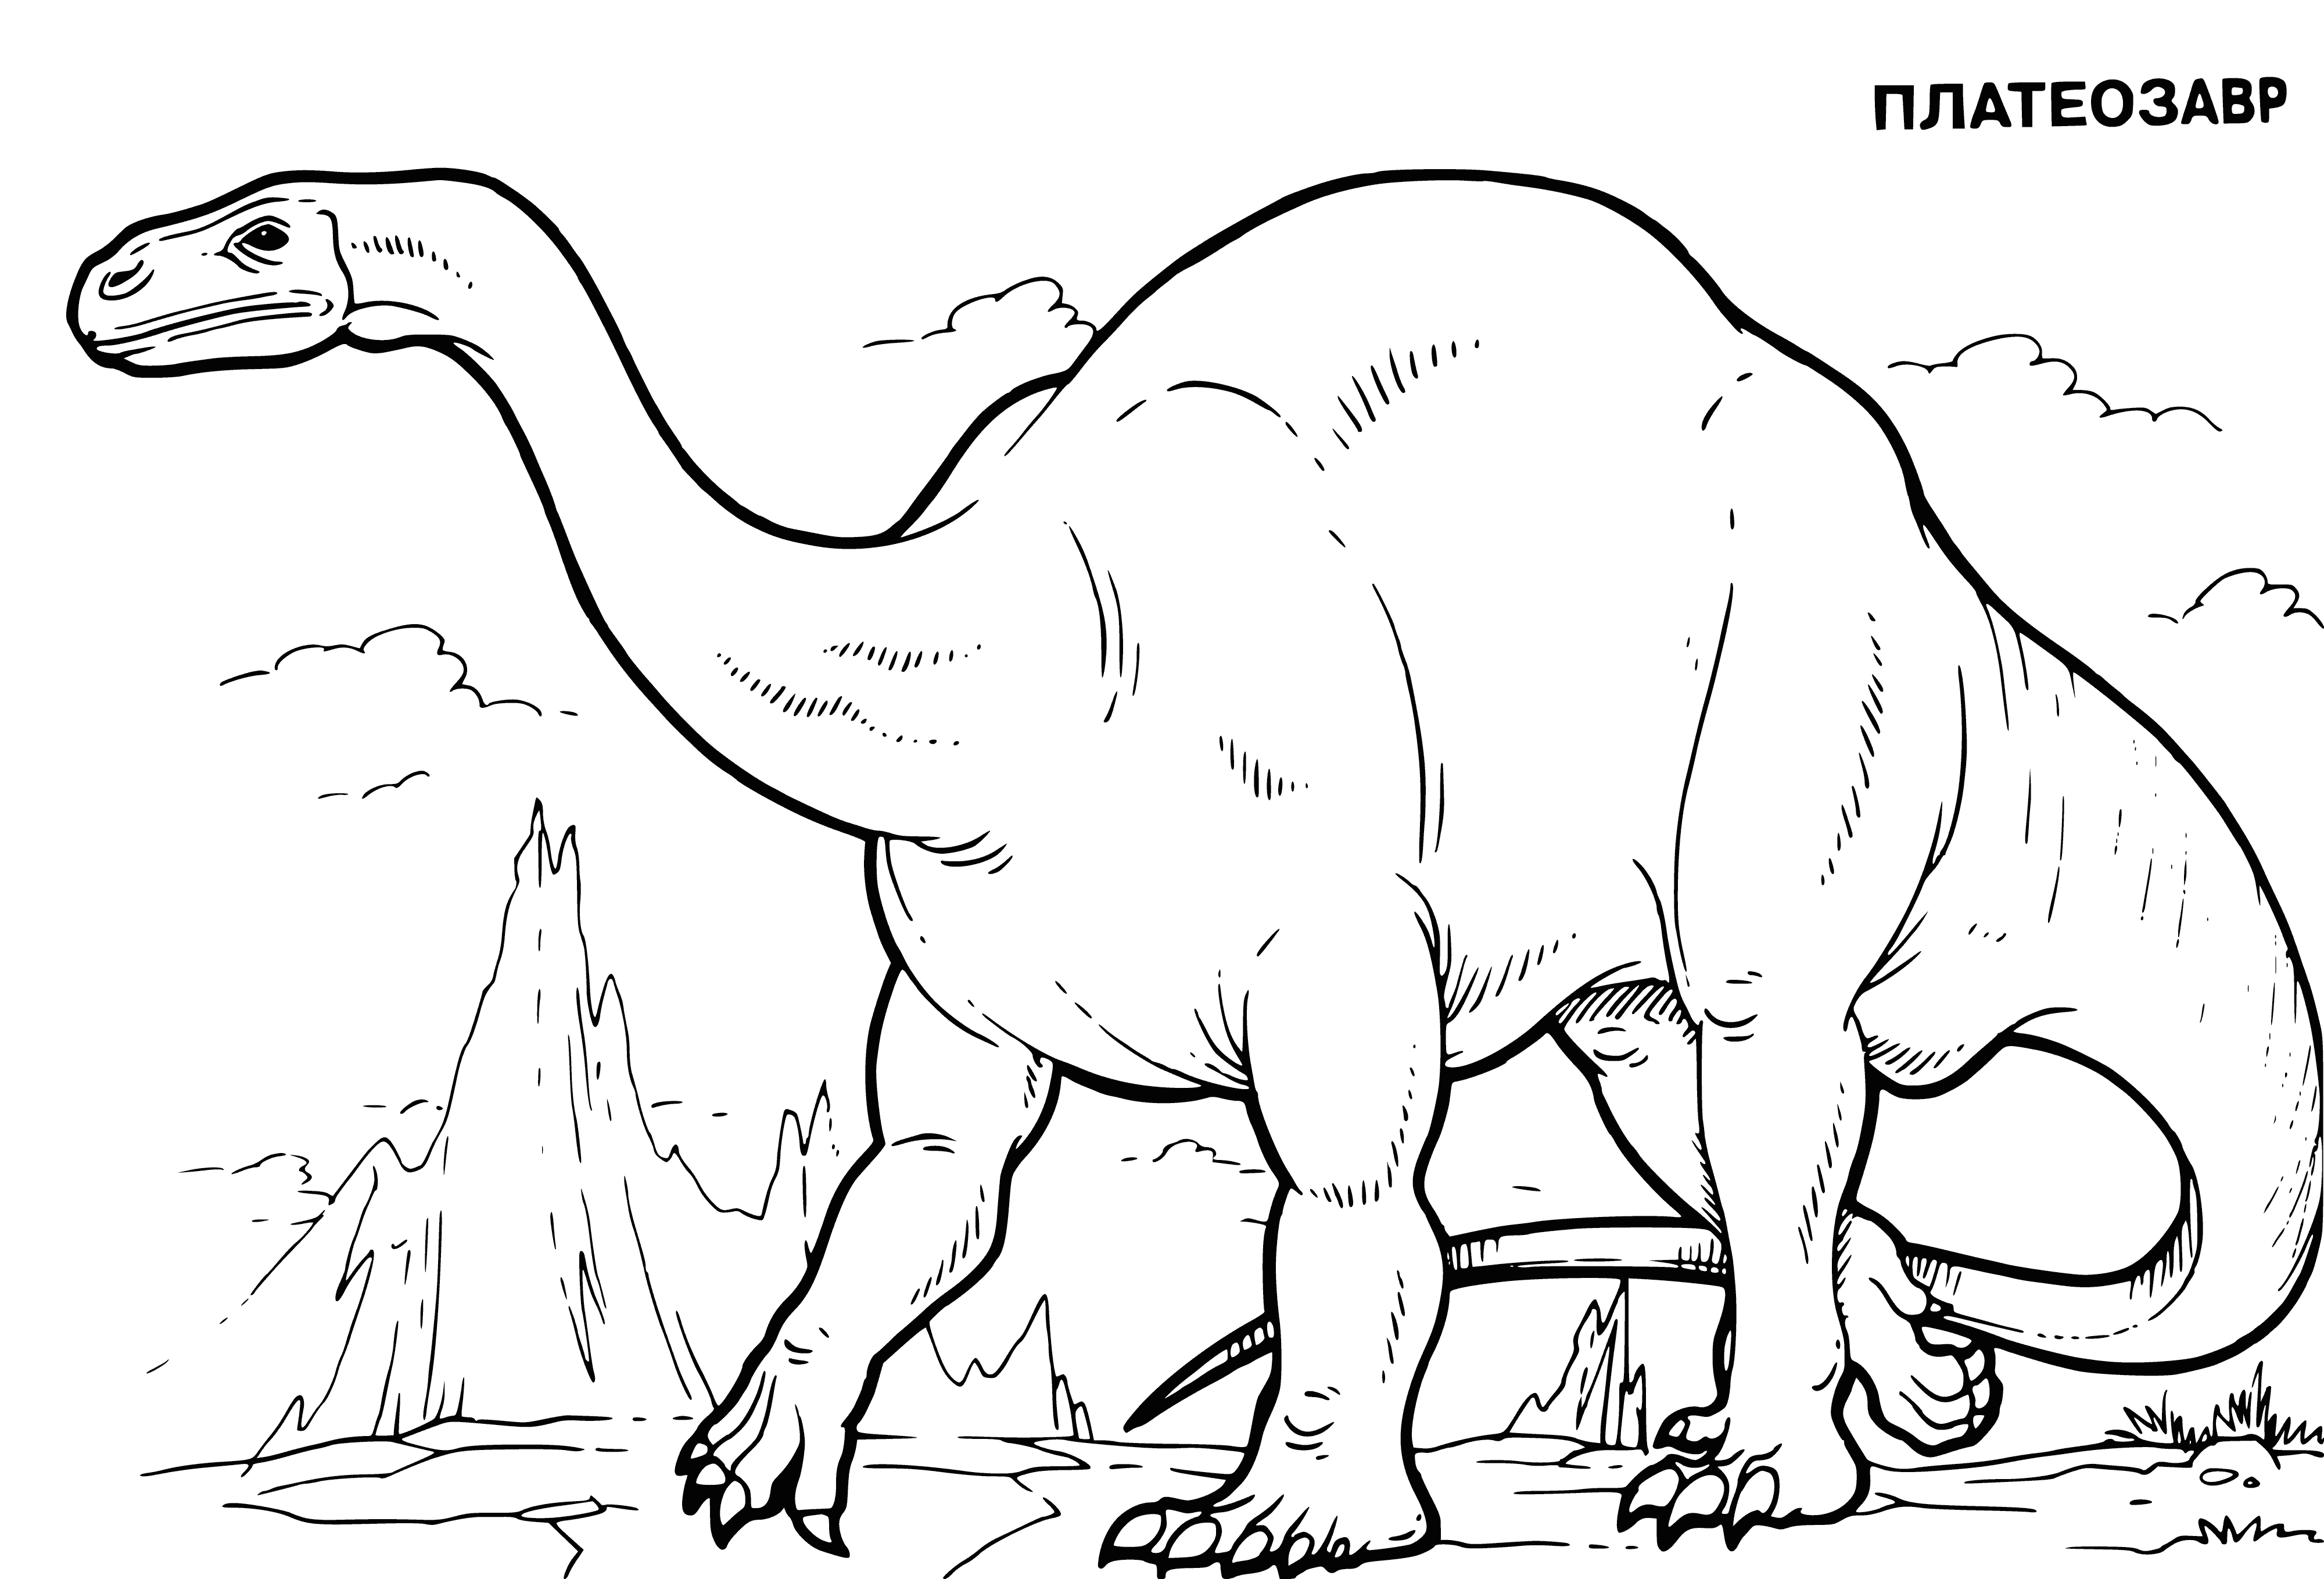 coloring page: Large, herbivore dinosaur with long snout, beak, small eyes, scaly skin, long tail and short legs.